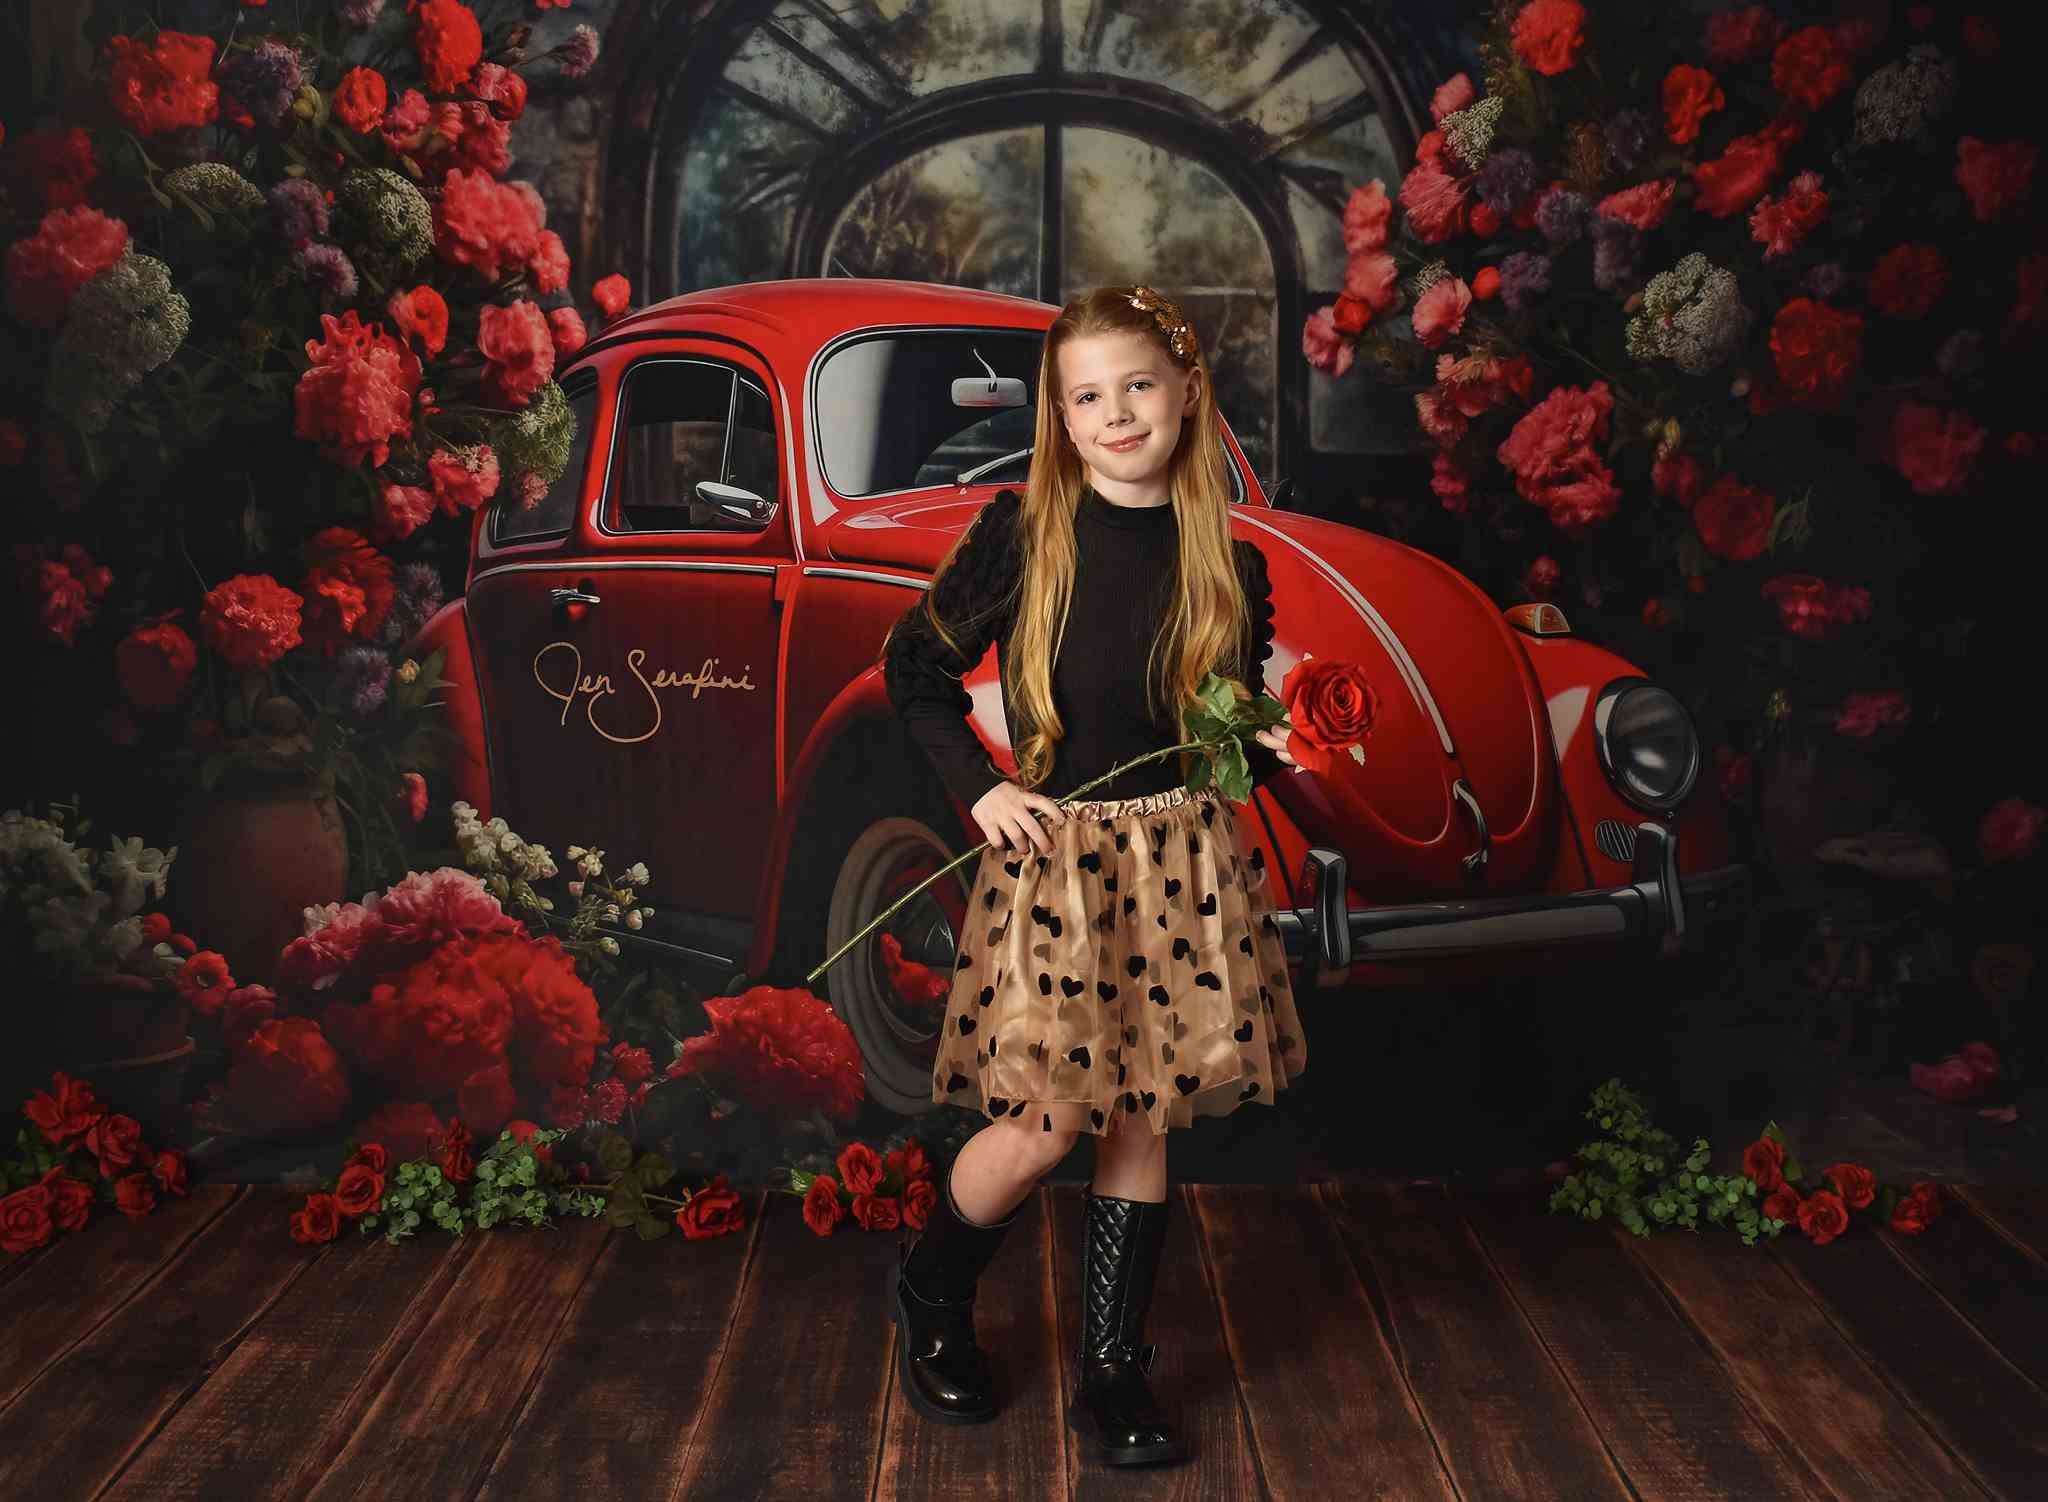 Kate Valentine's Day Red Car Backdrop Designed by Patty Roberts